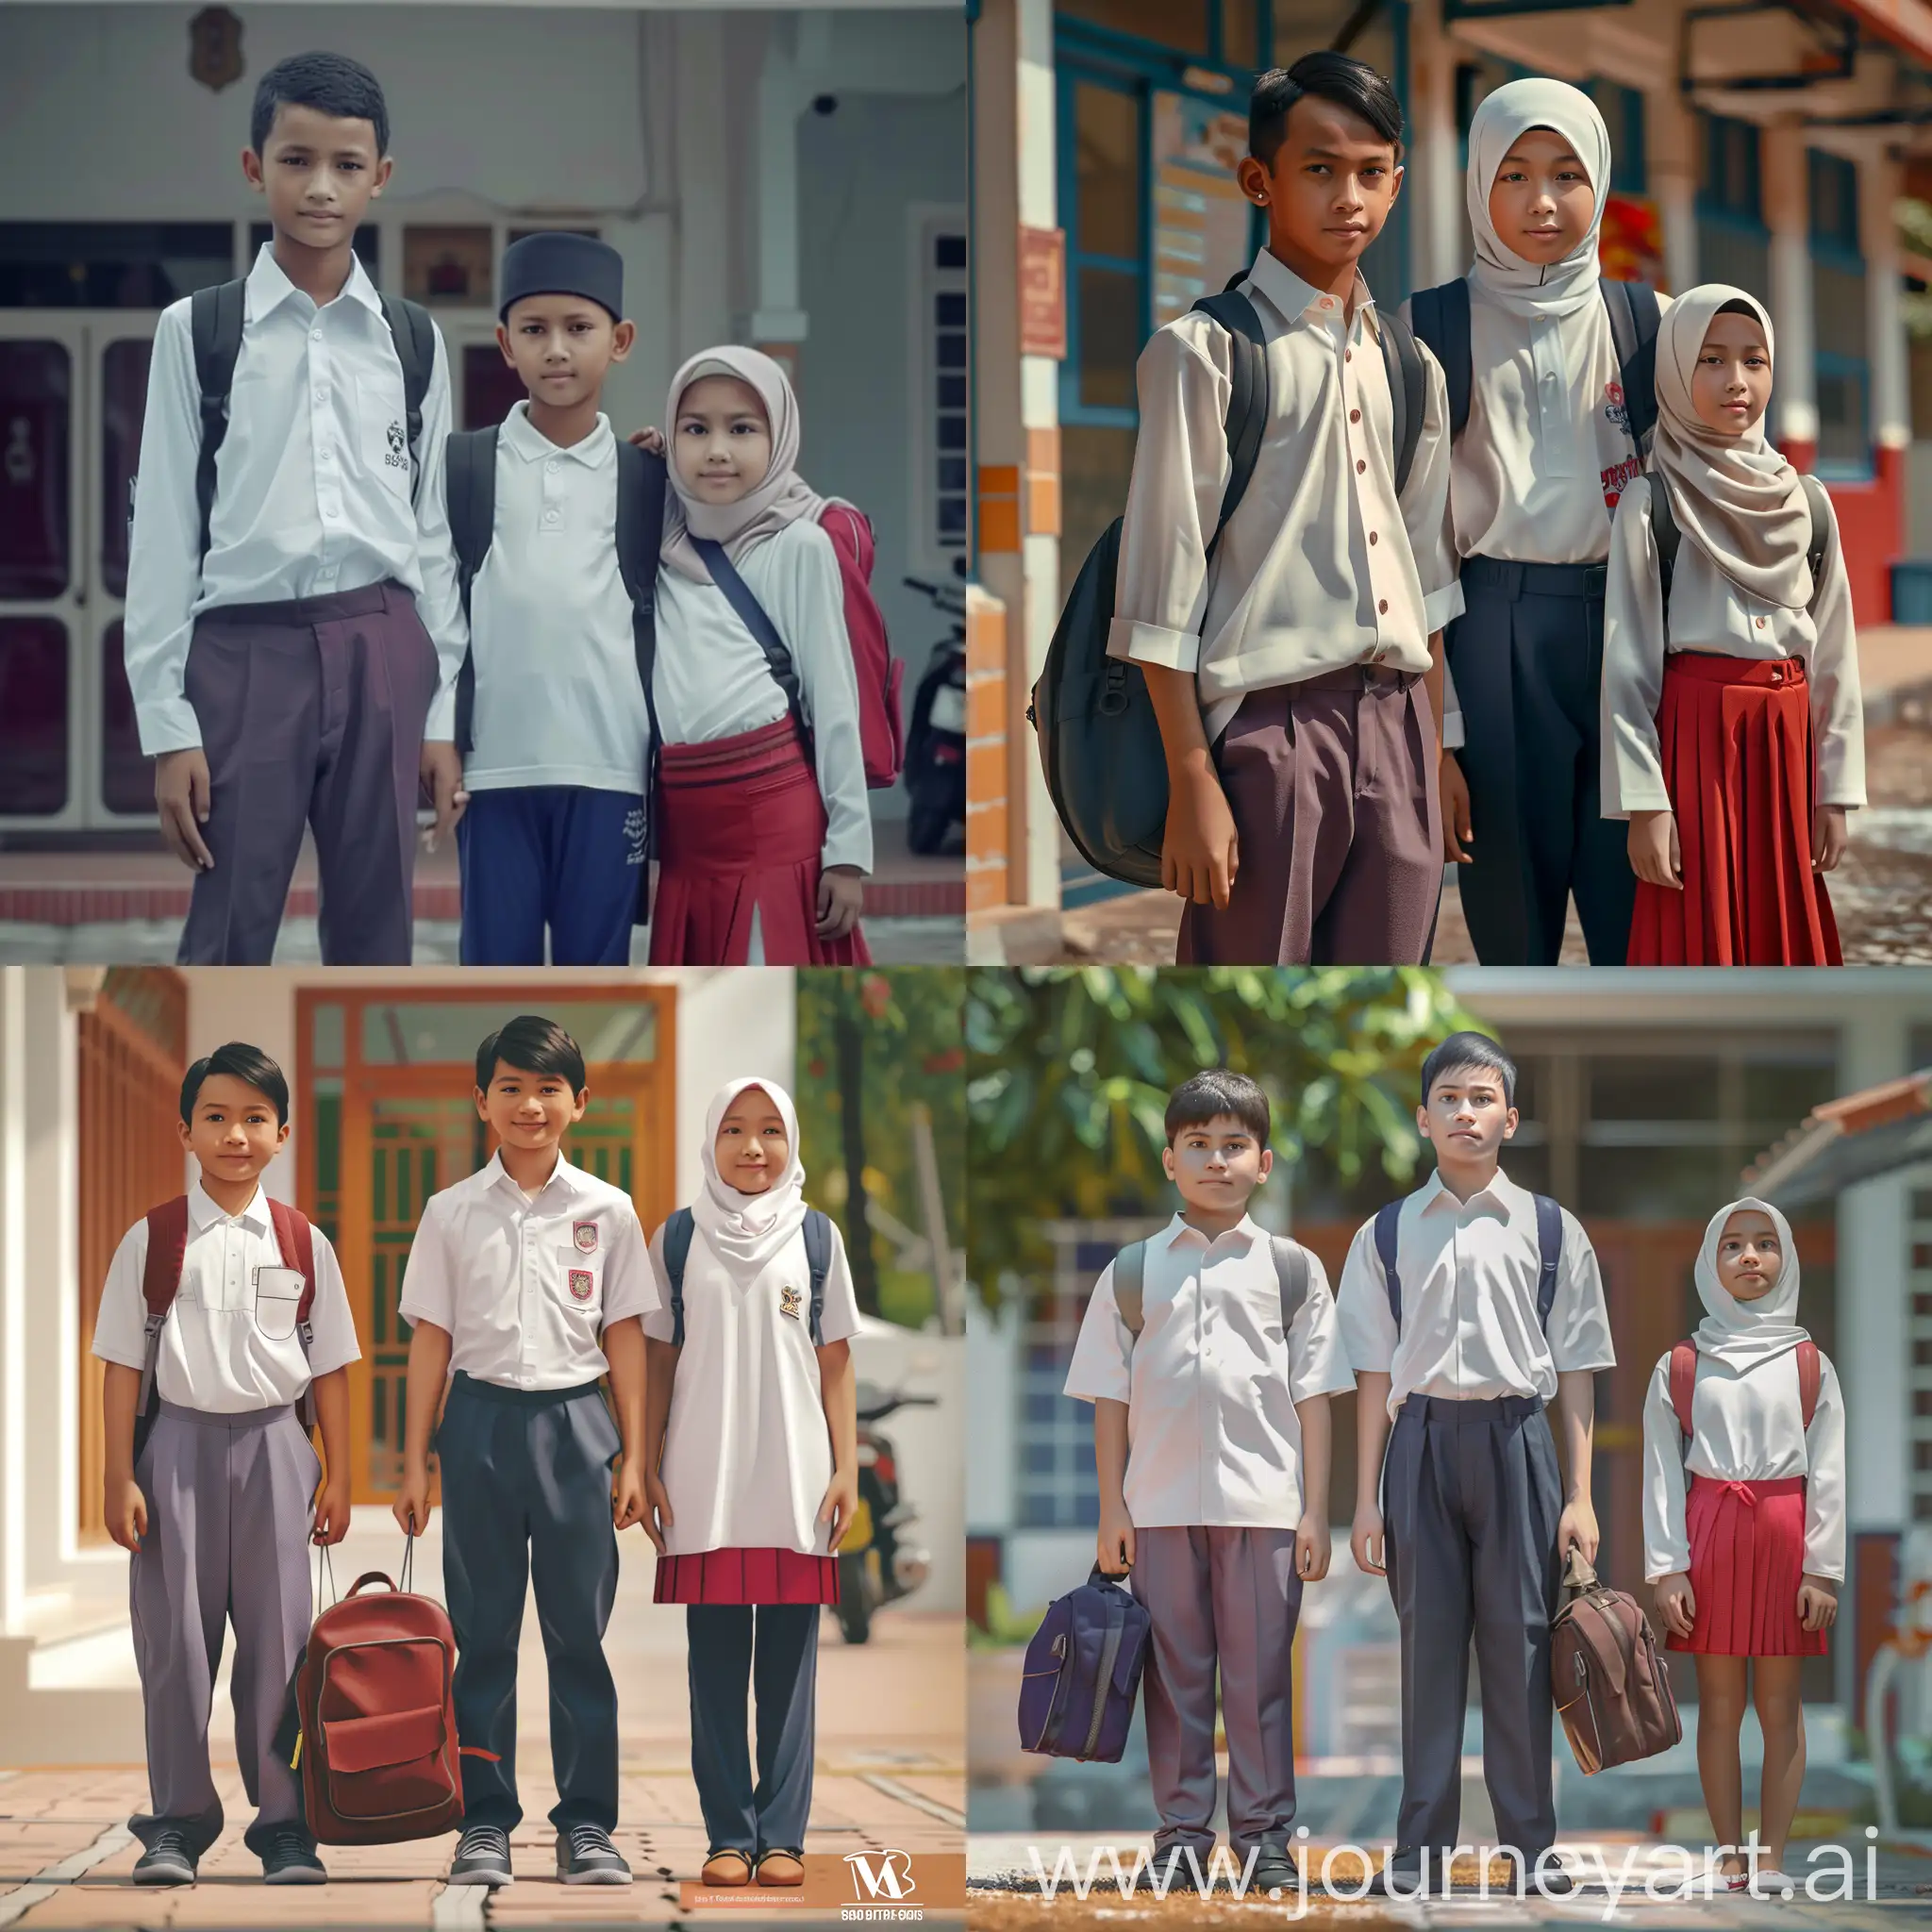 My bro, please make me a photo, an 18 year old Indonesian boy wearing a white shirt (school uniform), slightly wide face, sturdy body, violet gray trousers, and a 13 year old Indonesian boy  wearing a white shirt (school uniform), slightly wide face, sturdy body, wearing navy blue trousers, and a beautiful 10 year old girl, wearing a hijab, white long-sleeved shirt and red skirt, all carrying backpacks, posing in front of the school, resolution  300 dpi, highly detailed, hyper realistic, maximum exposure, 8k, ultra HD, professional photography.